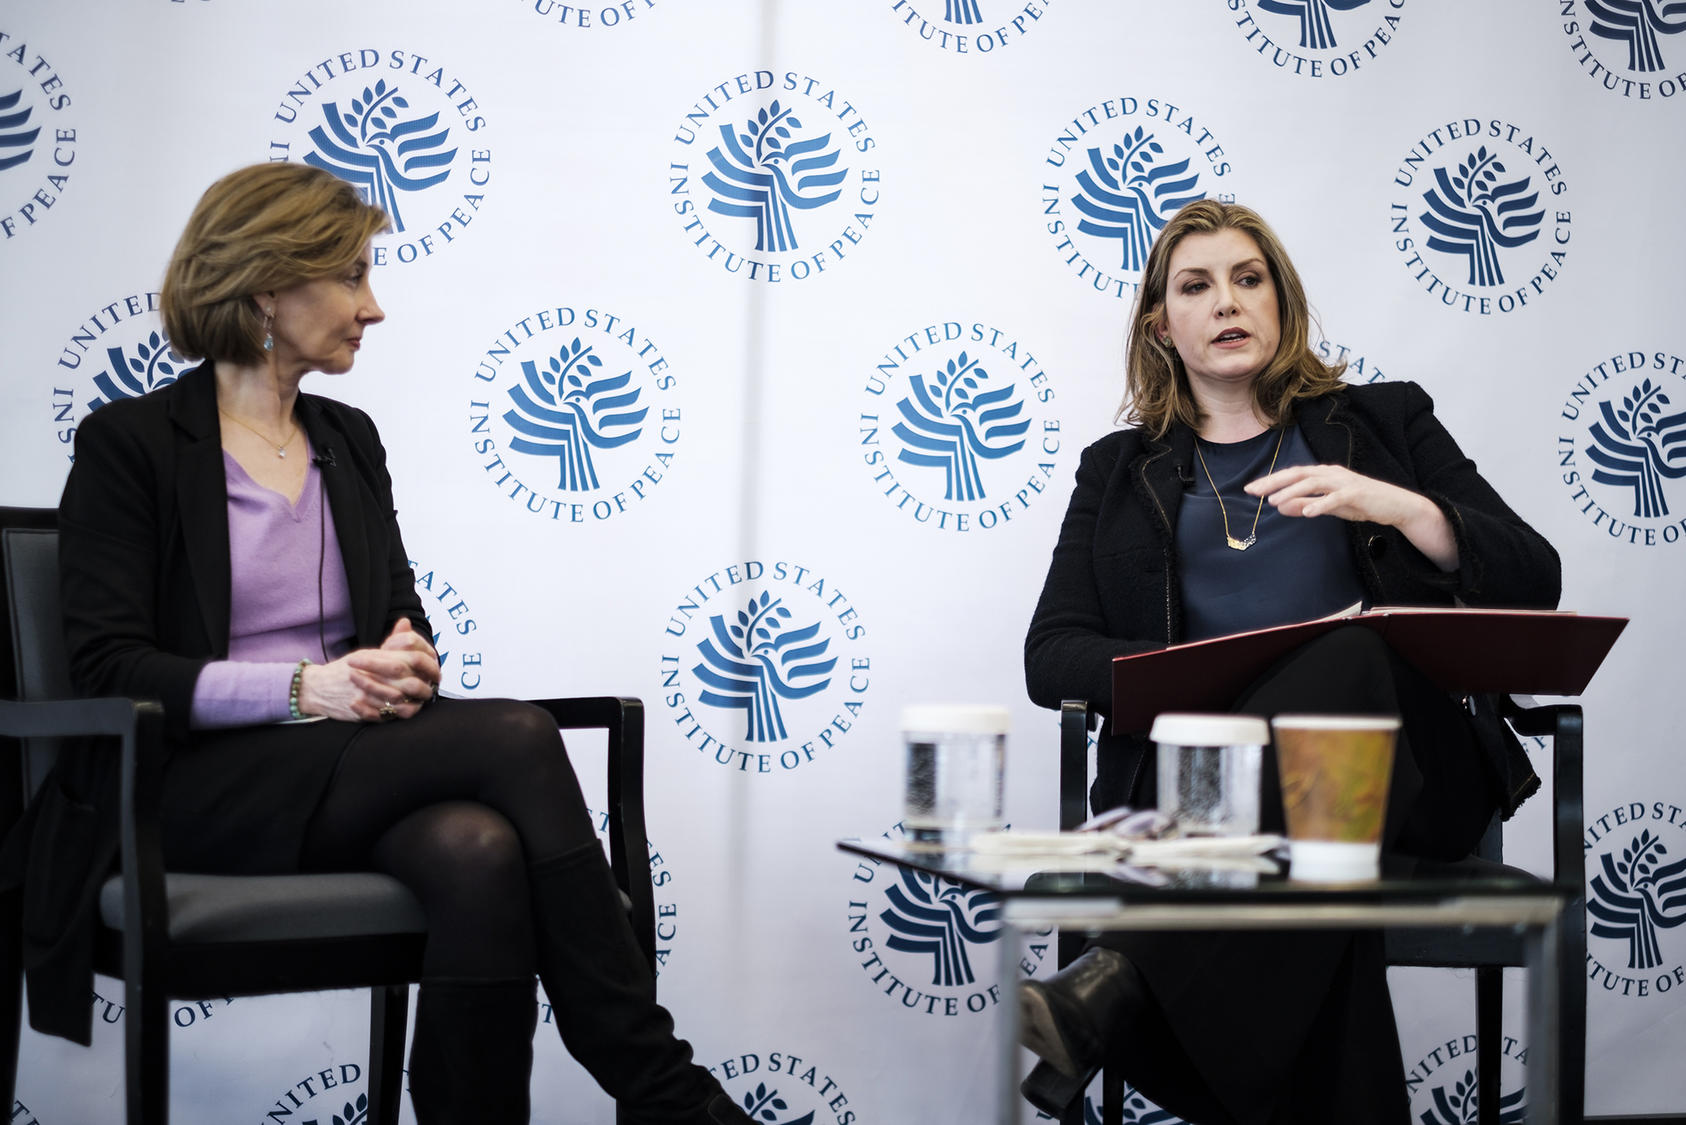 Penny Mordaunt (right), U.K. secretary of state for international development and minister for women and equalities, talks with Nancy Lindborg (left), president of the U.S. Institute of Peace.